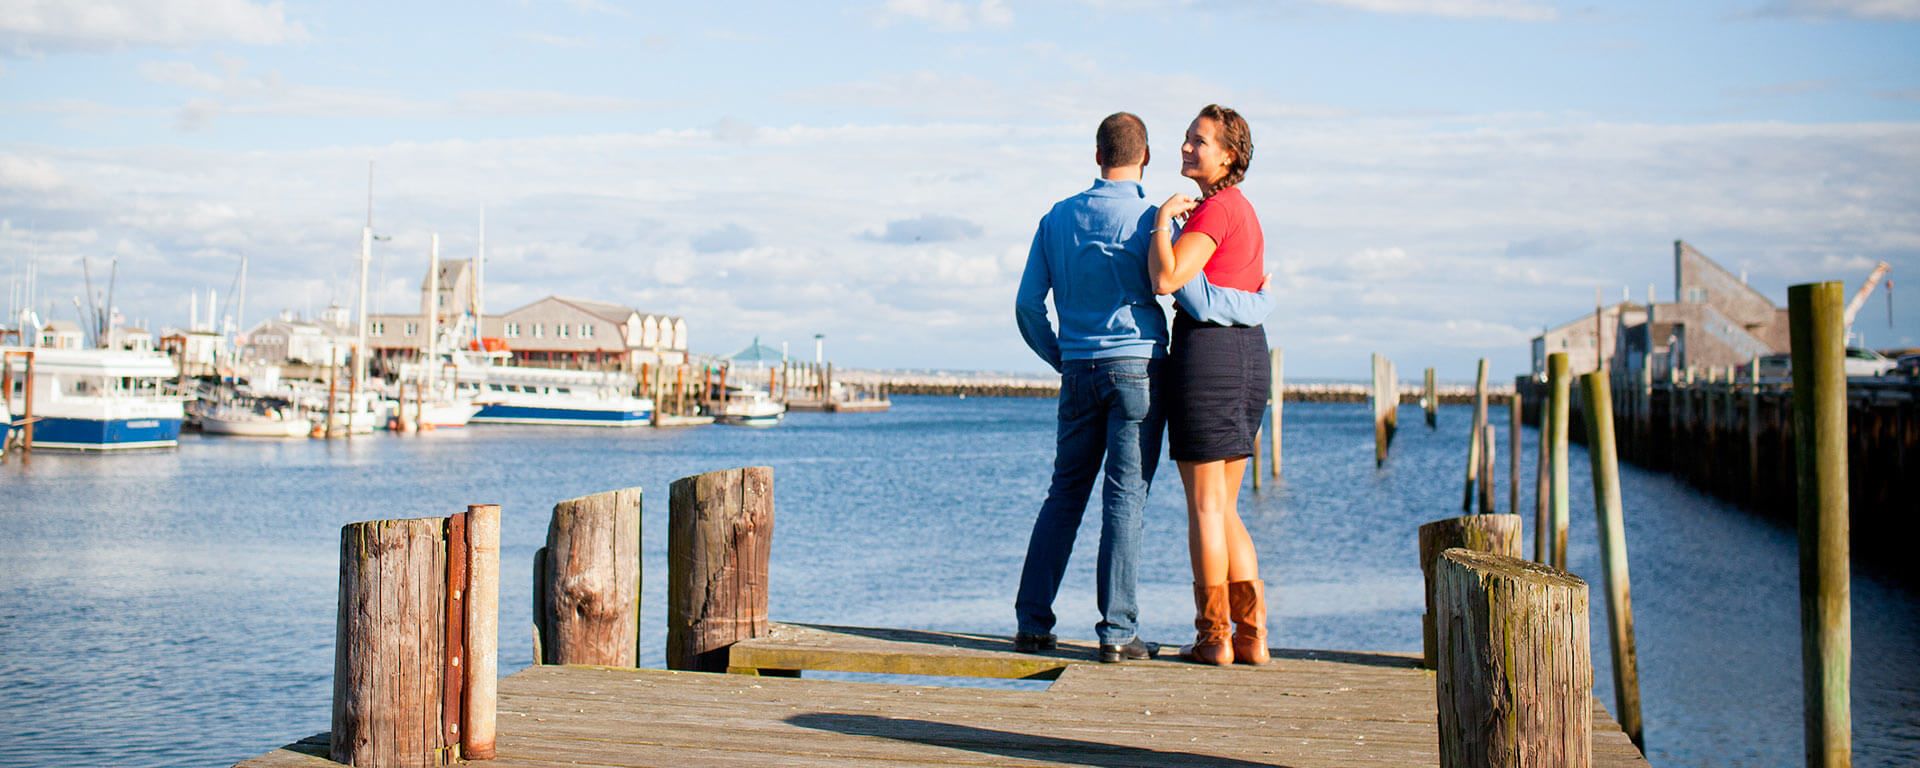 Must-Do Activities at Harbor Hotel, Provincetown